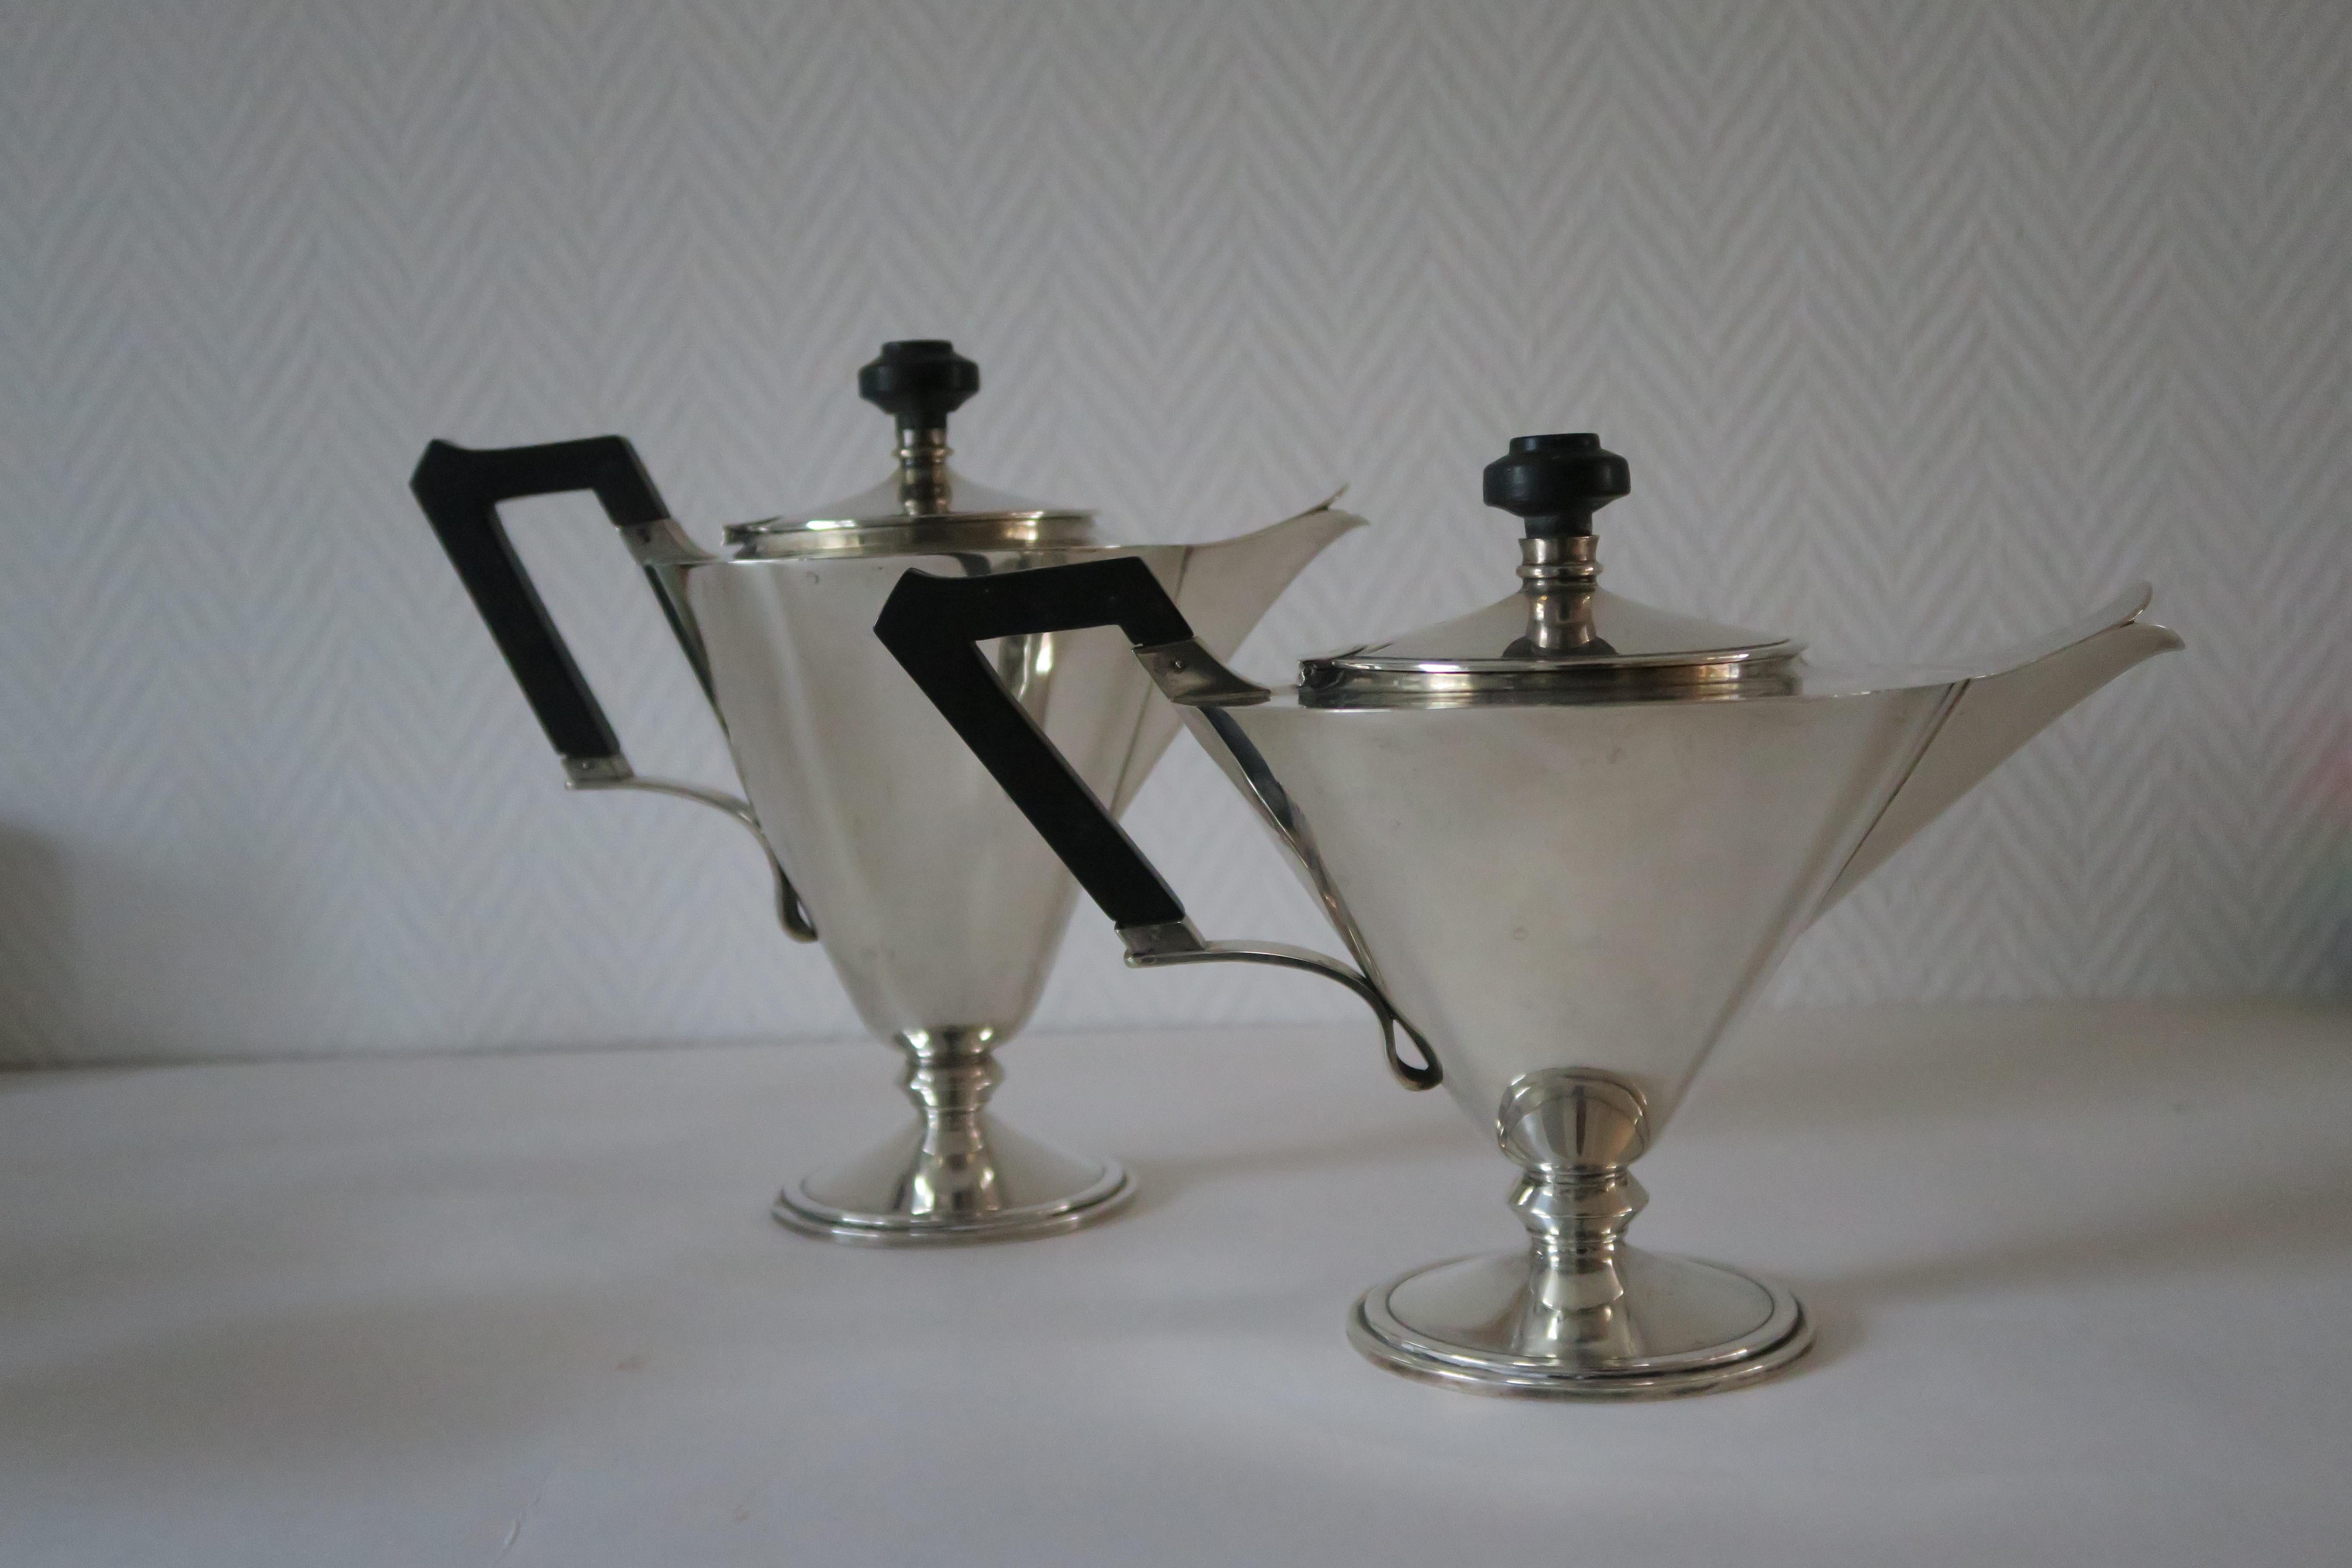 A Coffee and tea set with sugar pot and milk jug
All pieces are made of Sterling silver
with bakelite handles
all pieces marked Fr Veniziani Milano Firenze 900
